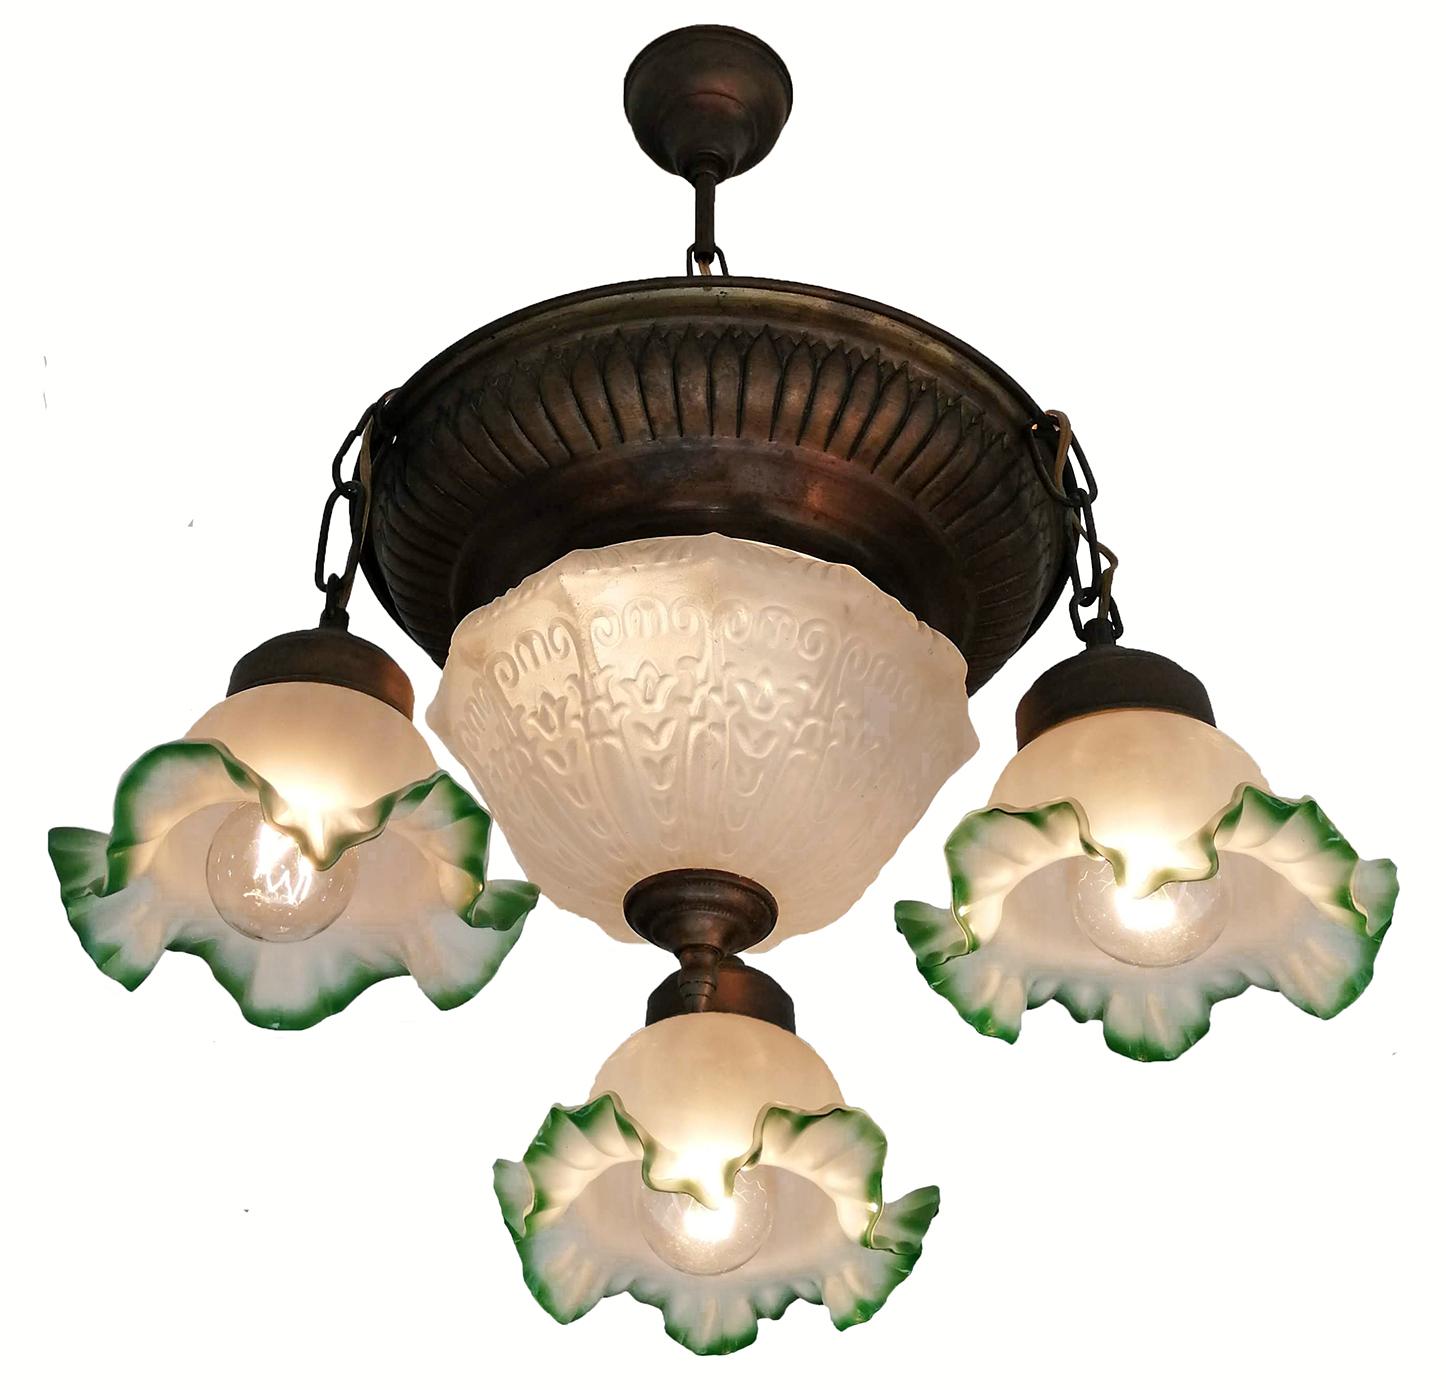 Burnished Antique French Art Deco and Art Nouveau Fogged Green Glass 5-Light Chandelier For Sale